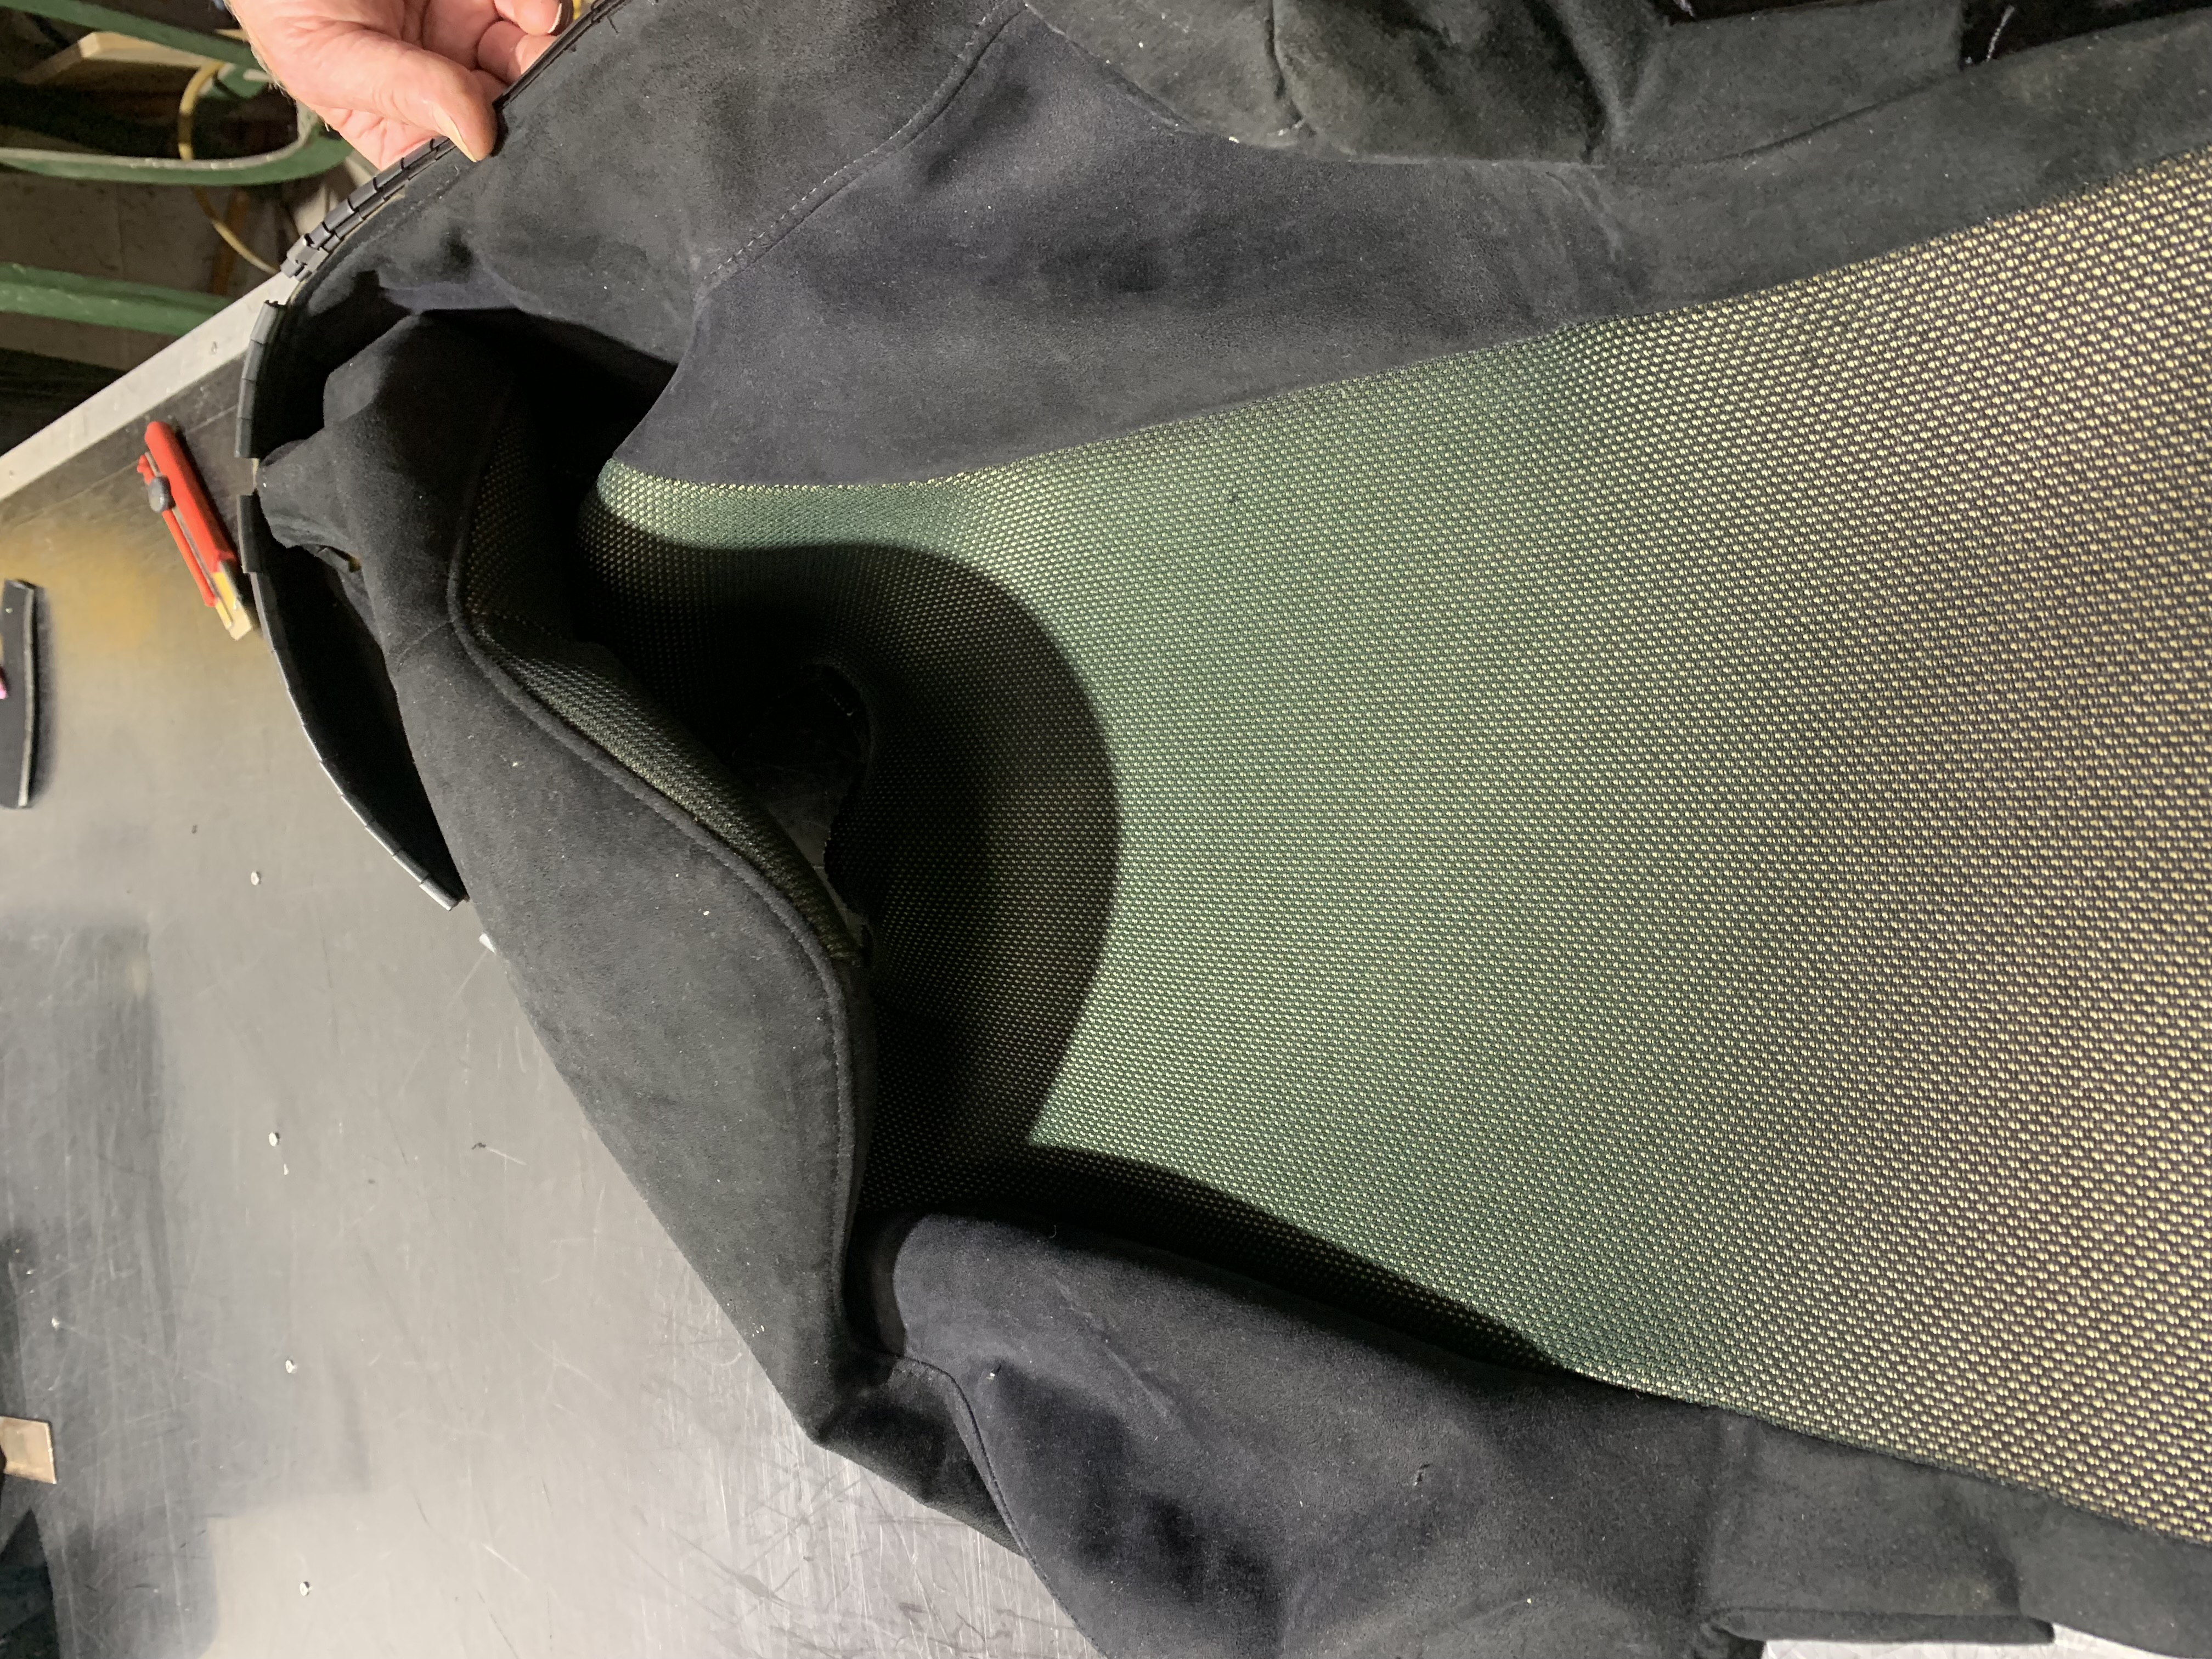 007 OEM Seat Cover Removed.JPG